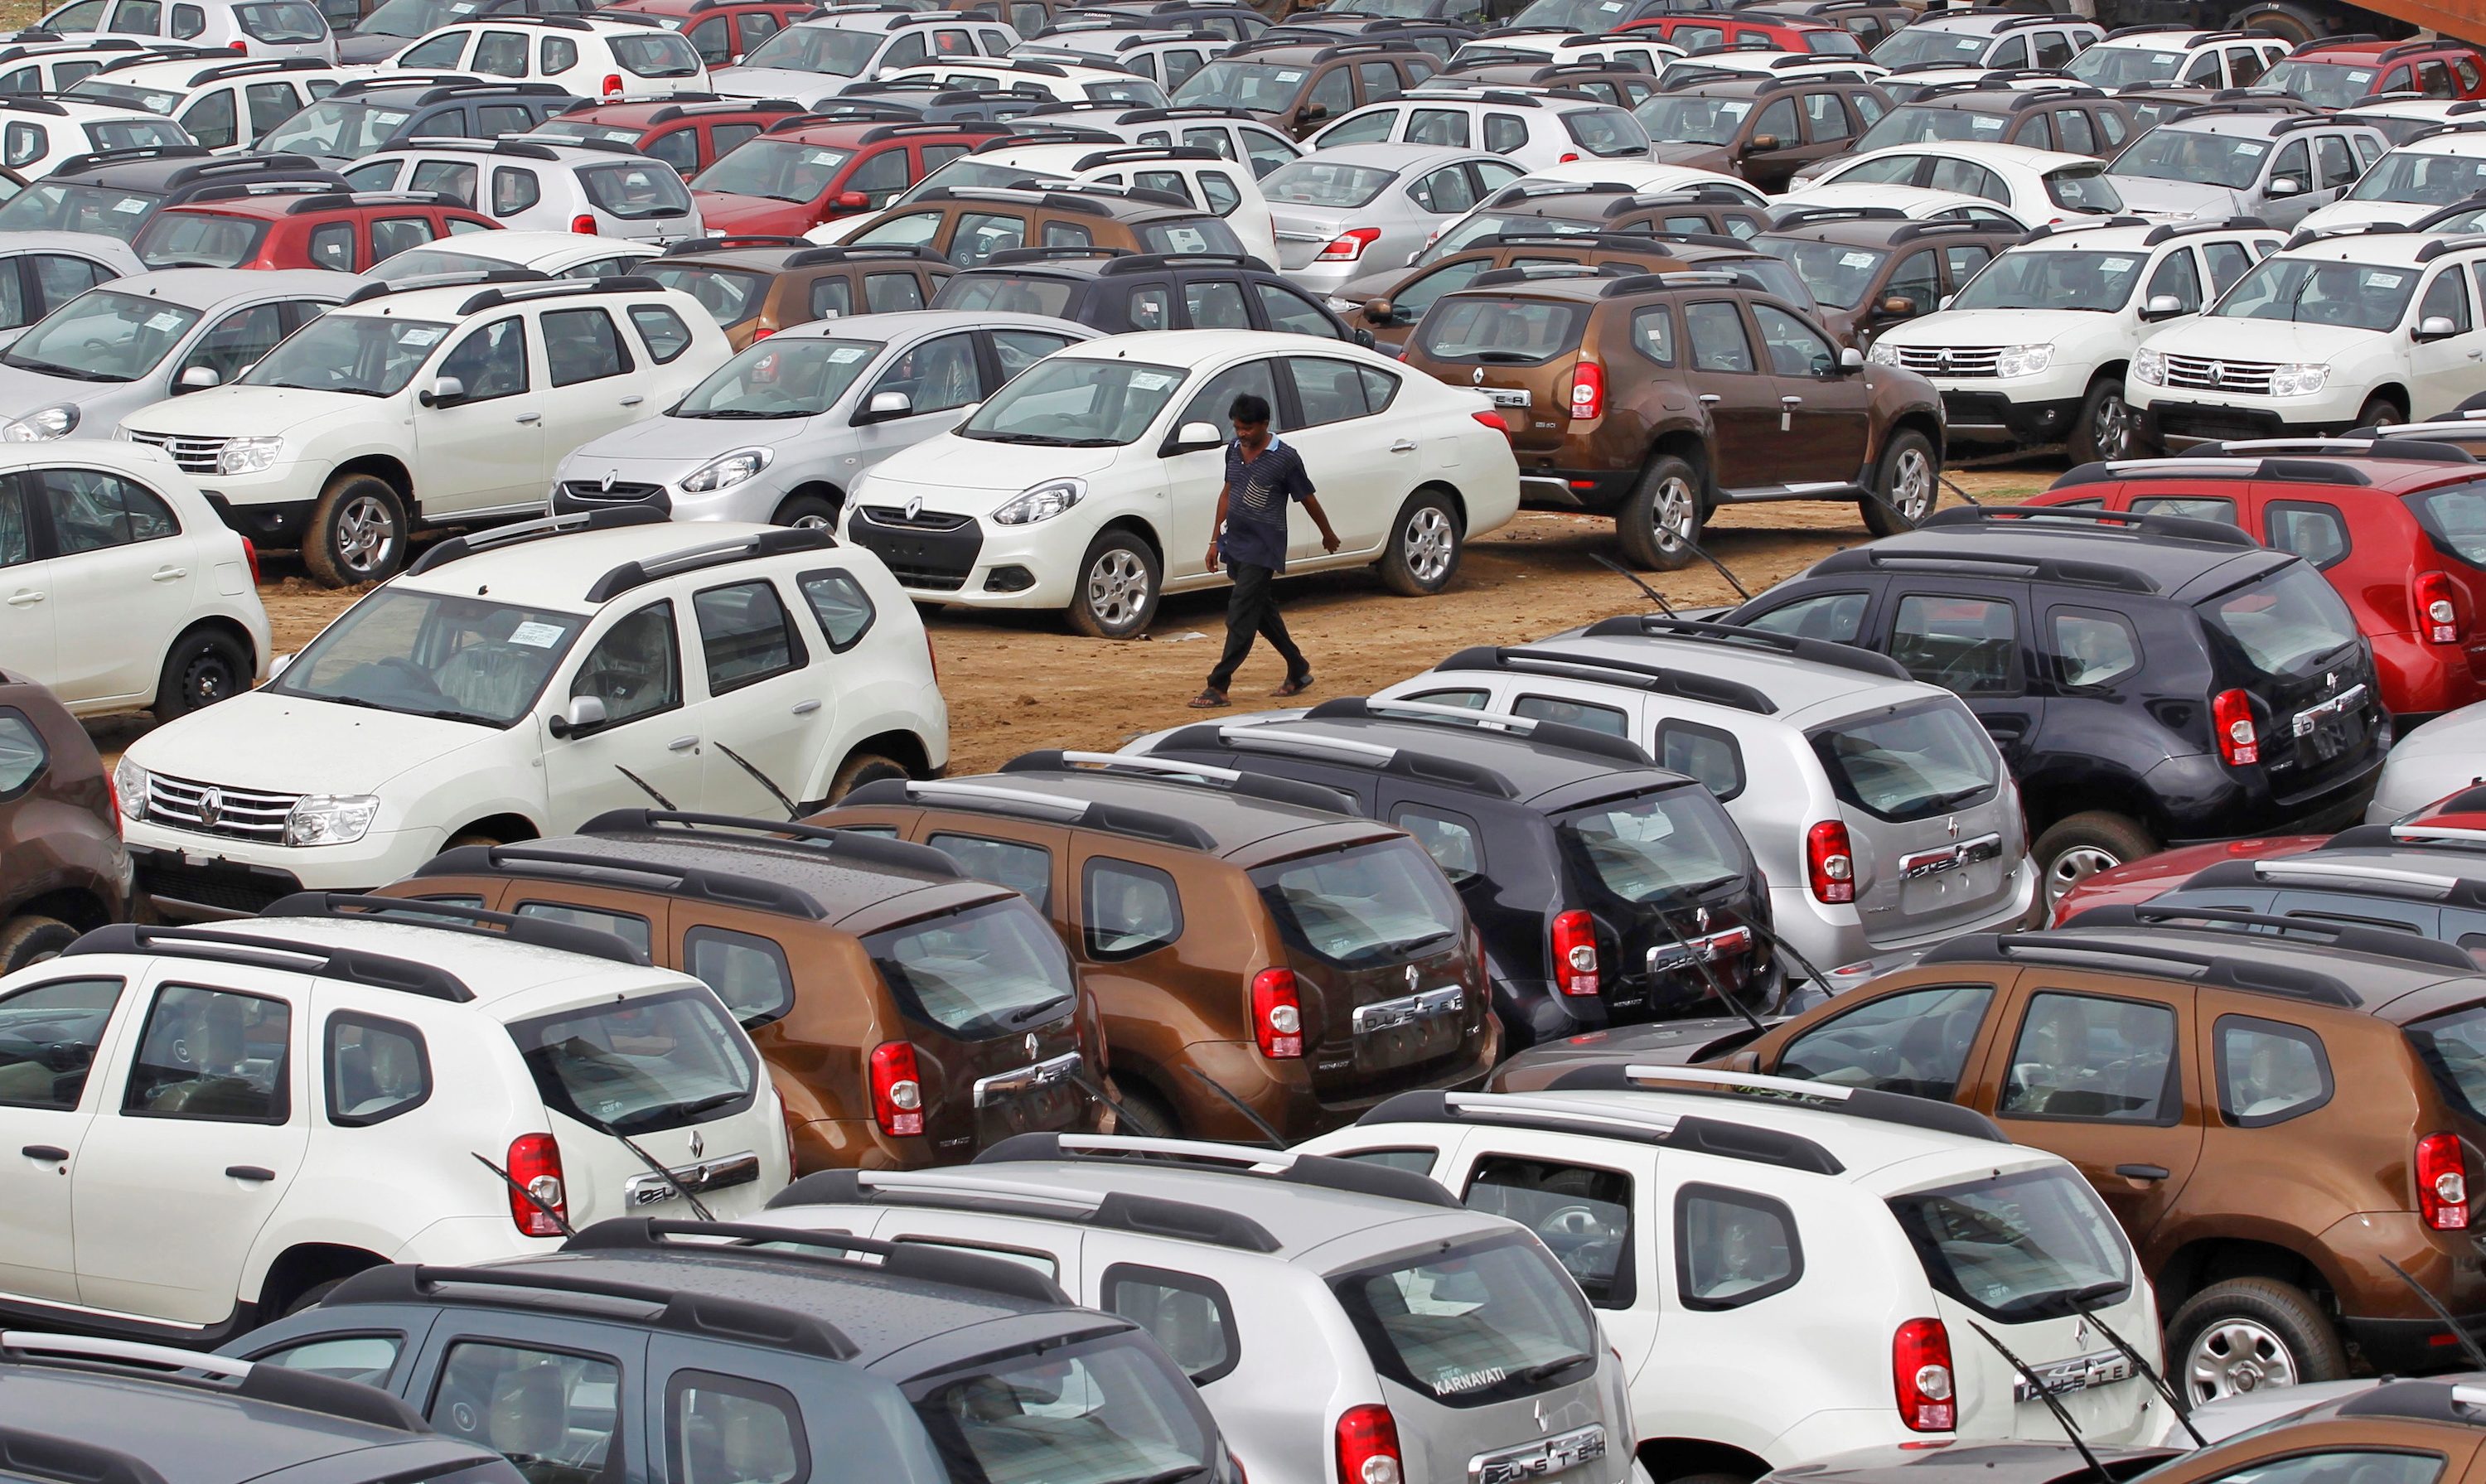 Renault-Nissan, Hyundai face shutdowns in India over workers’ COVID-19 fears